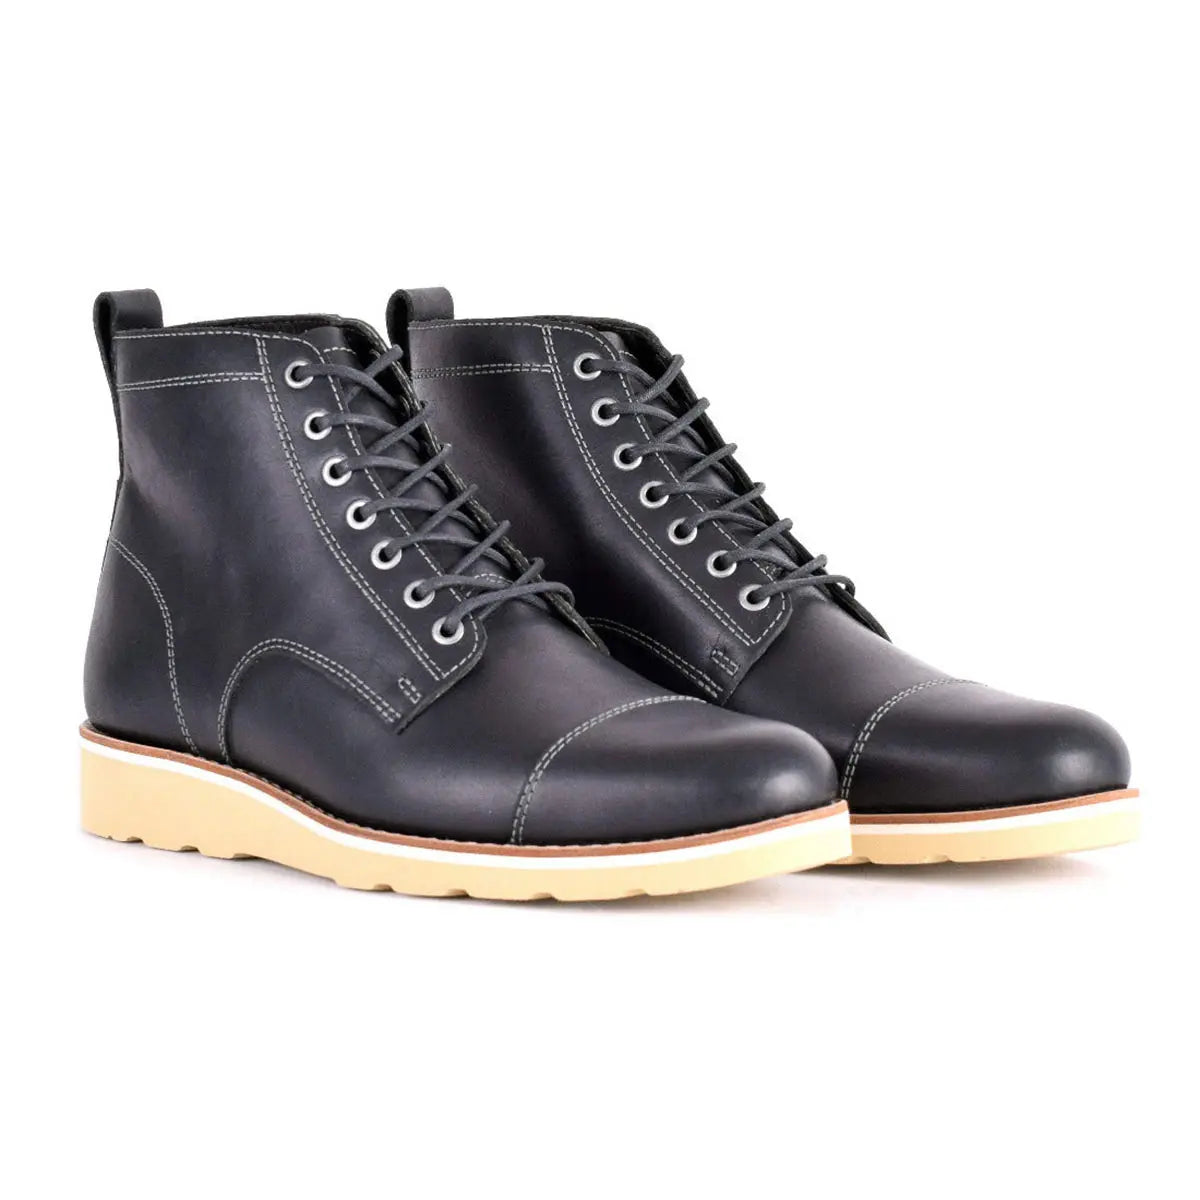 HELM Boots The Lou, Black